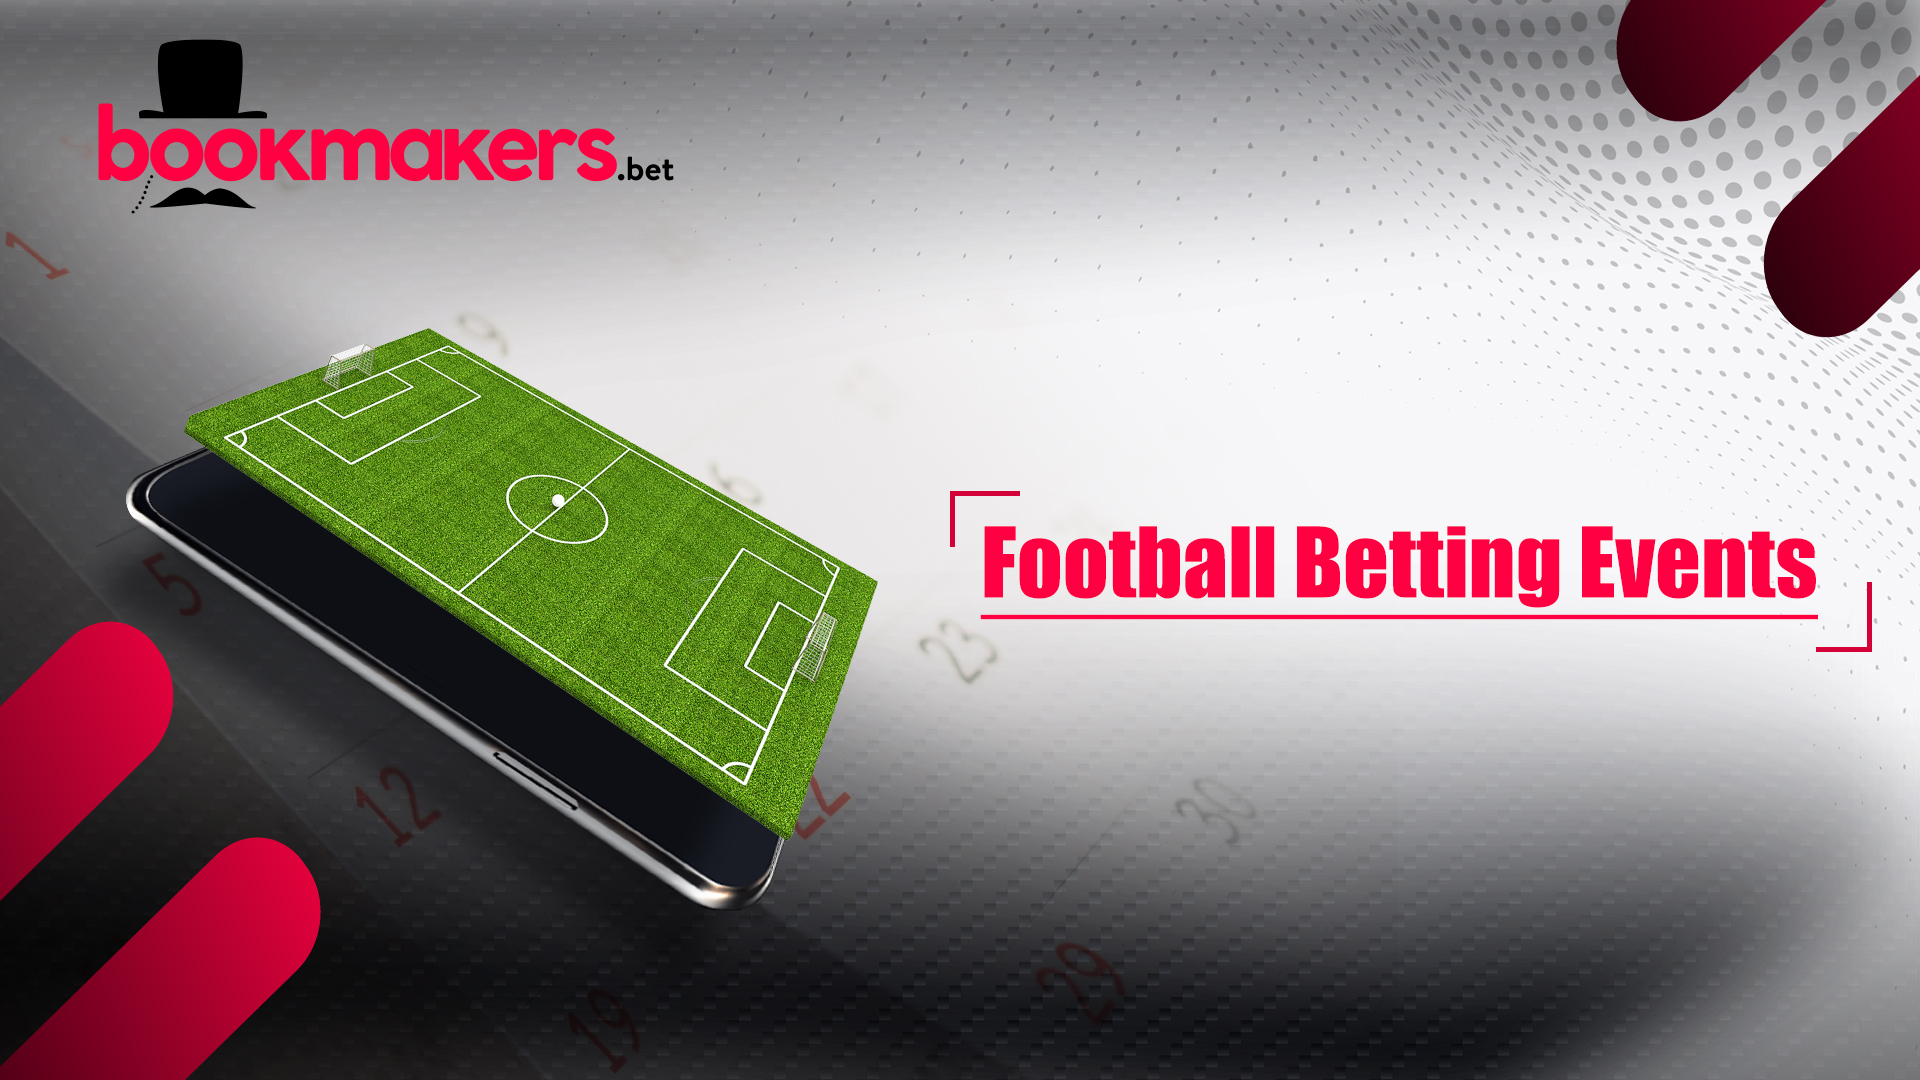 Football Betting Events